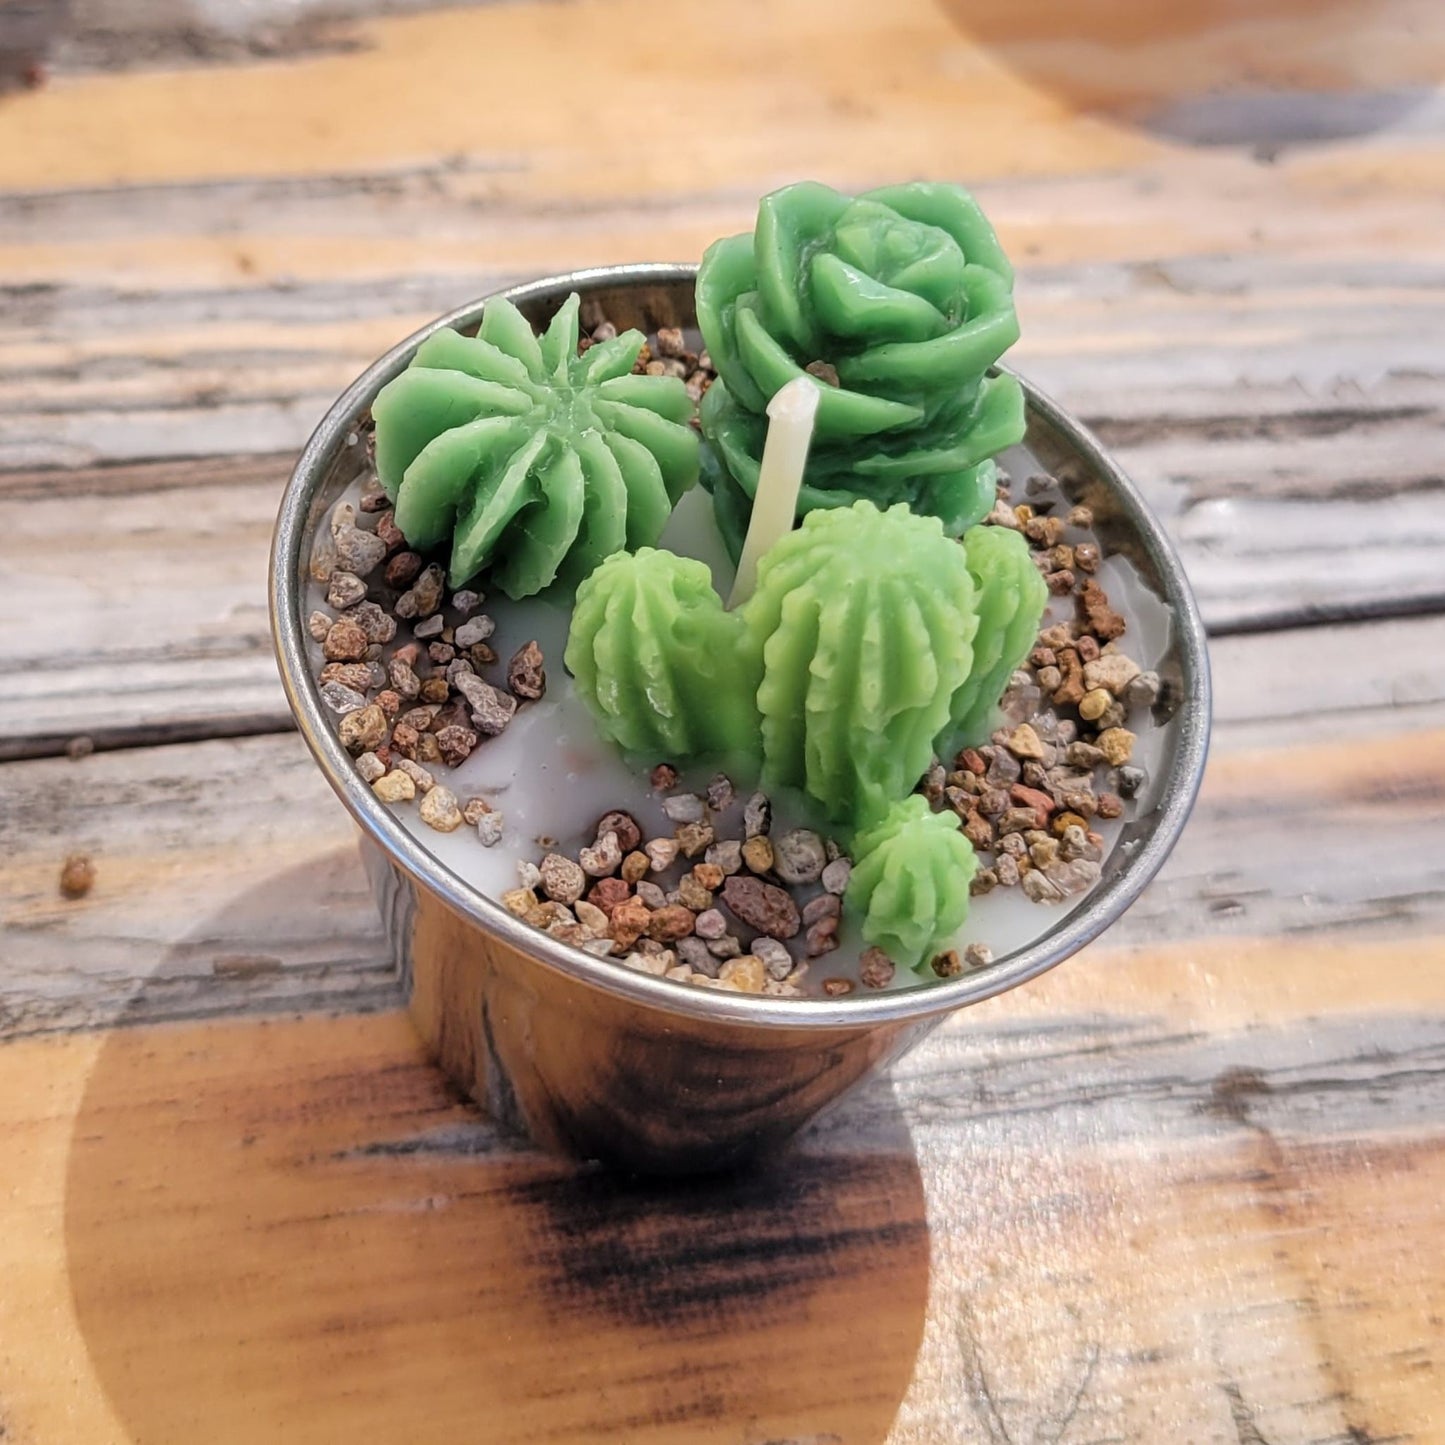 A handmade succulent candle in a stainless steel cup.